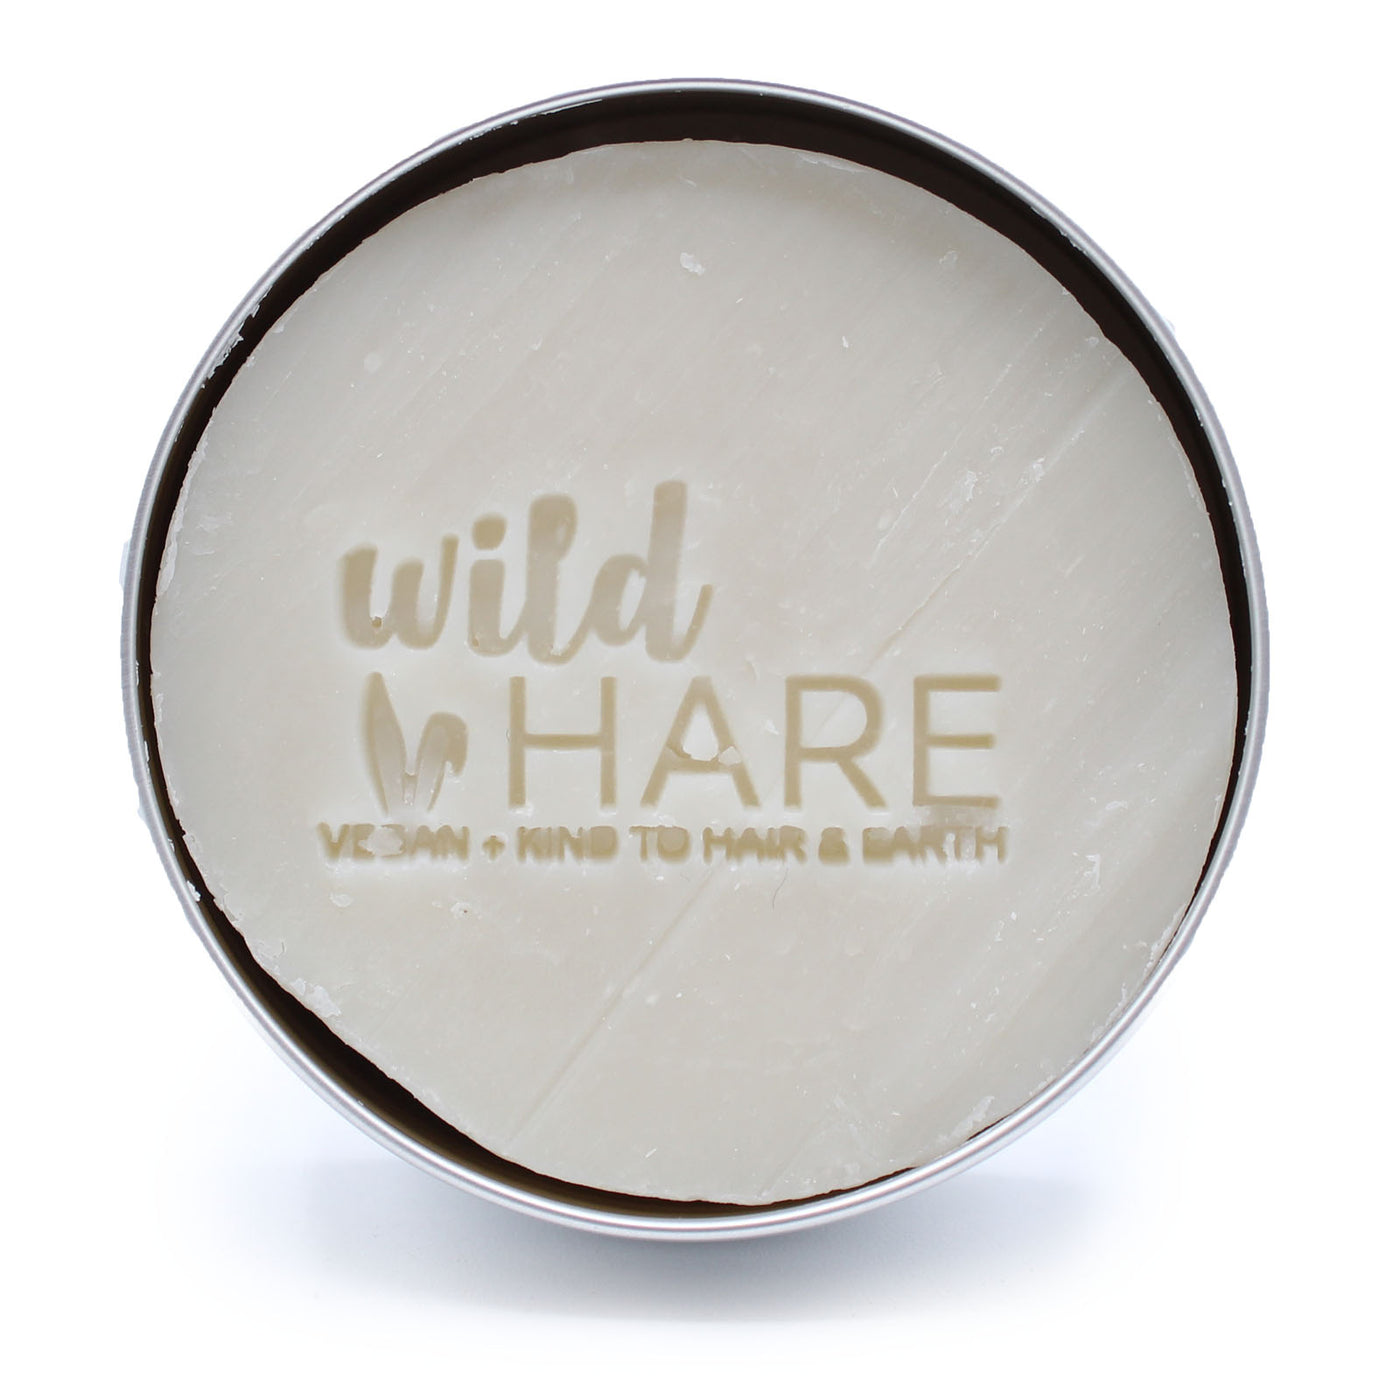 Wild Hare Paraben Free Solid Shampoo 60g – Hairy Coconut.